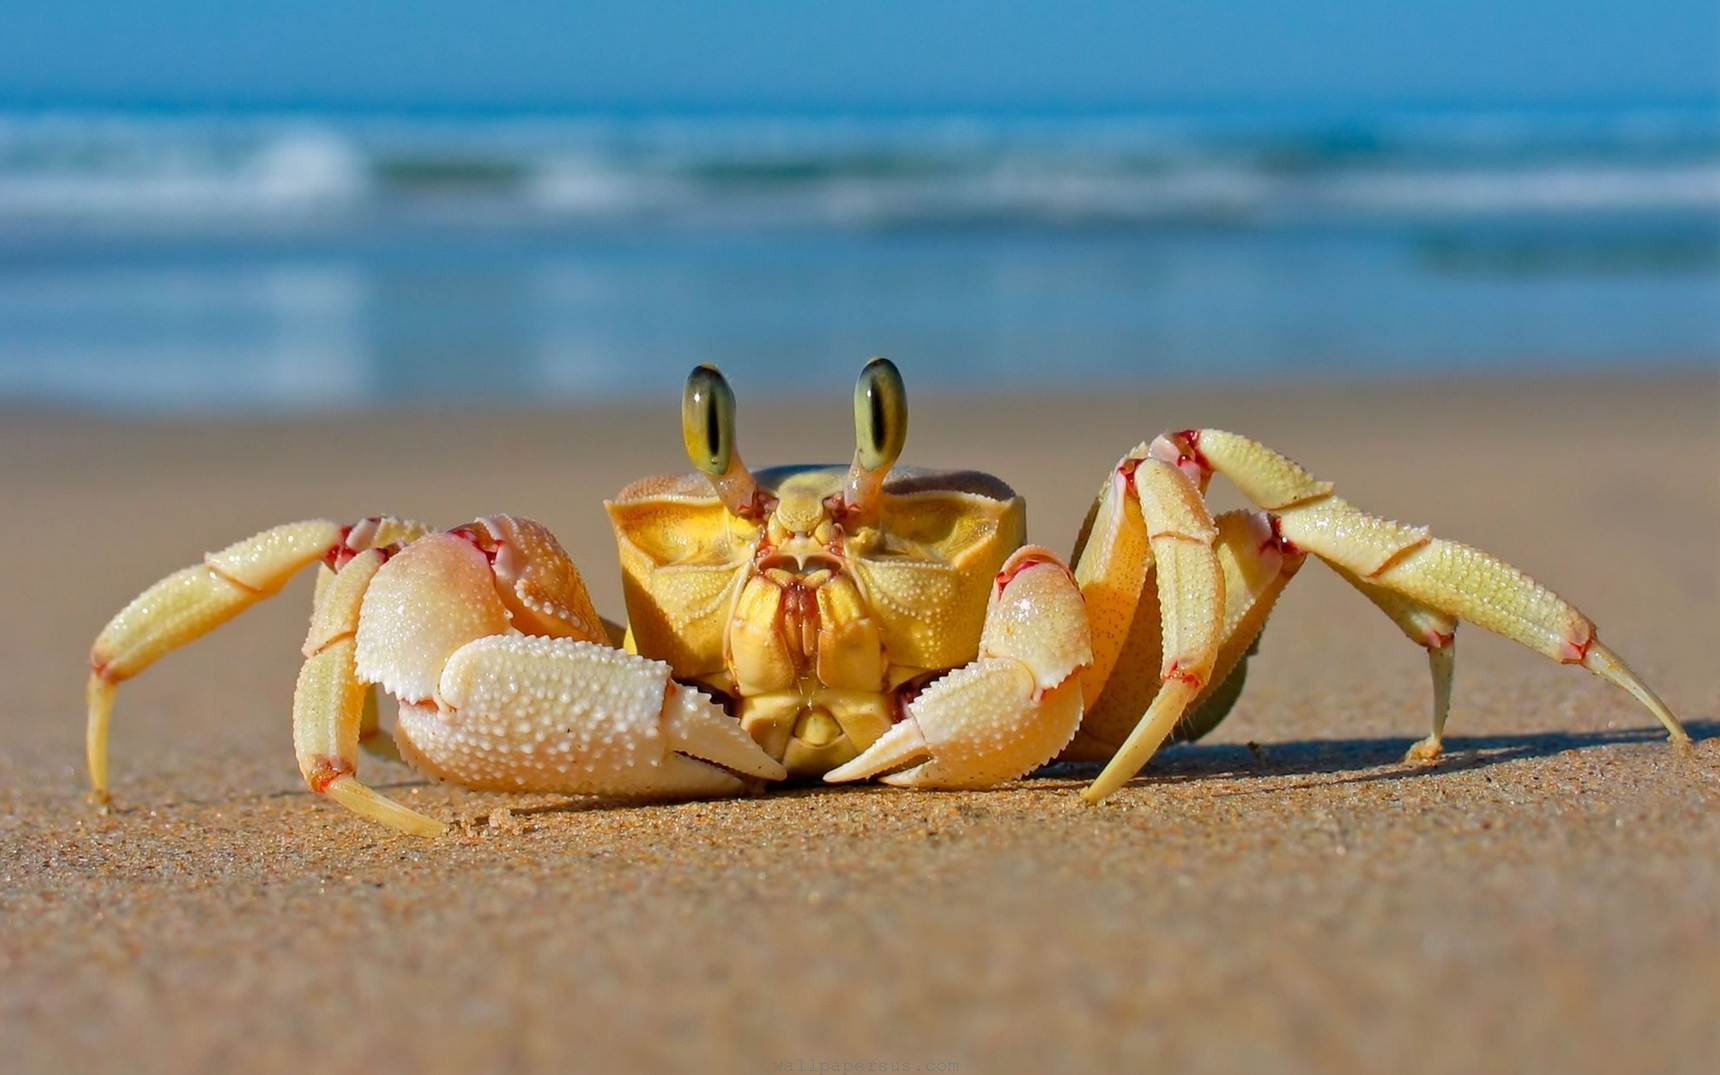 Sea crabs can be seen at the beach just before sunset land for sale in Rhodes, Greece